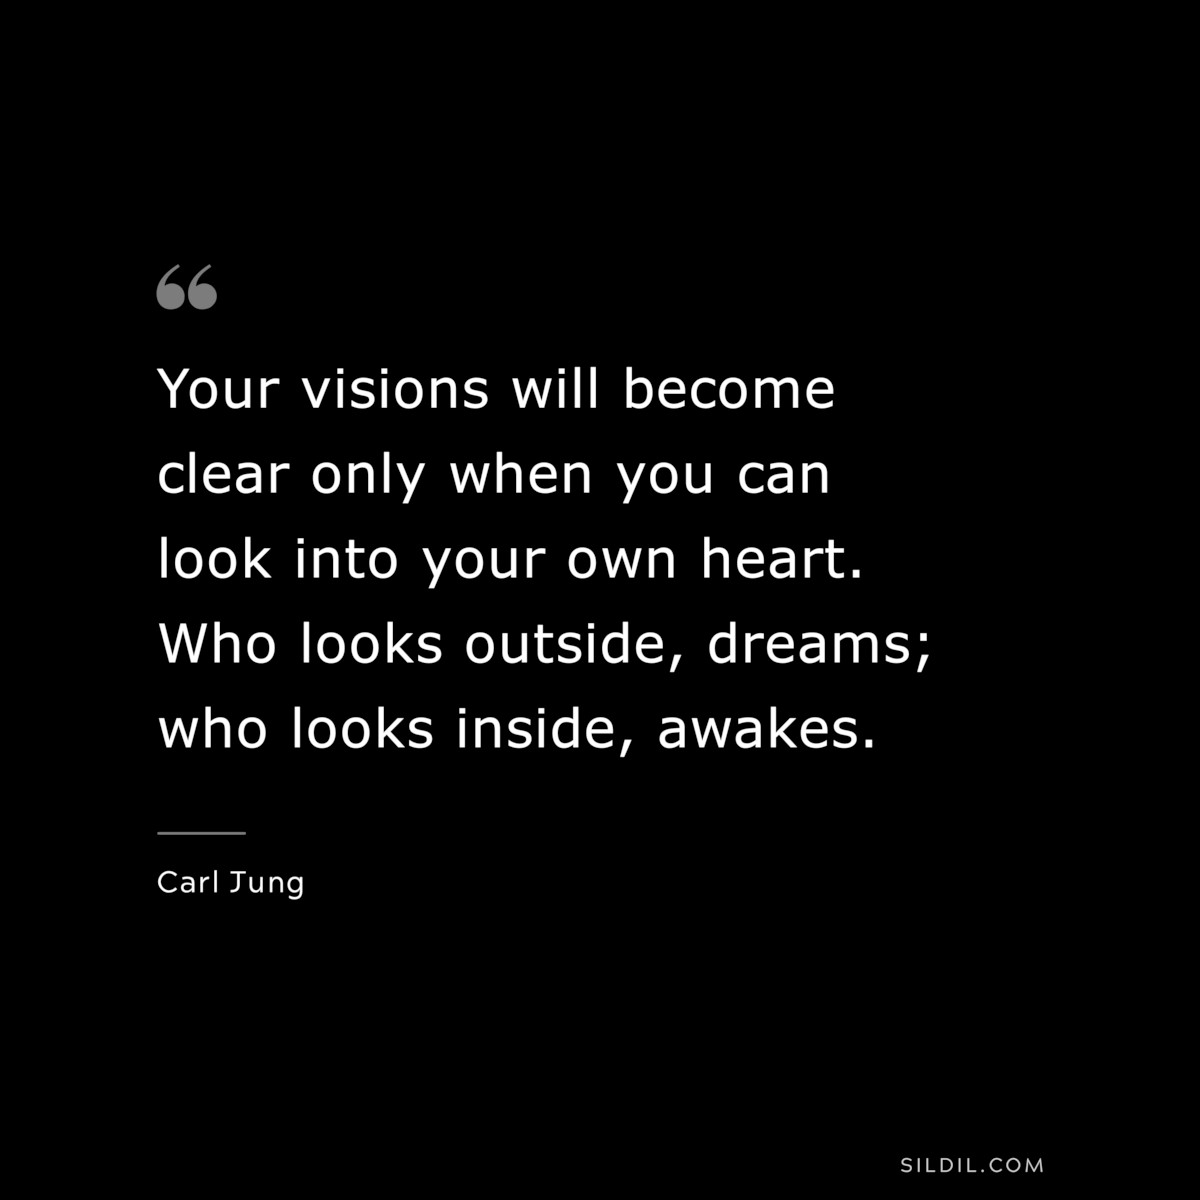 Your visions will become clear only when you can look into your own heart. Who looks outside, dreams; who looks inside, awakes. ― Carl Jung